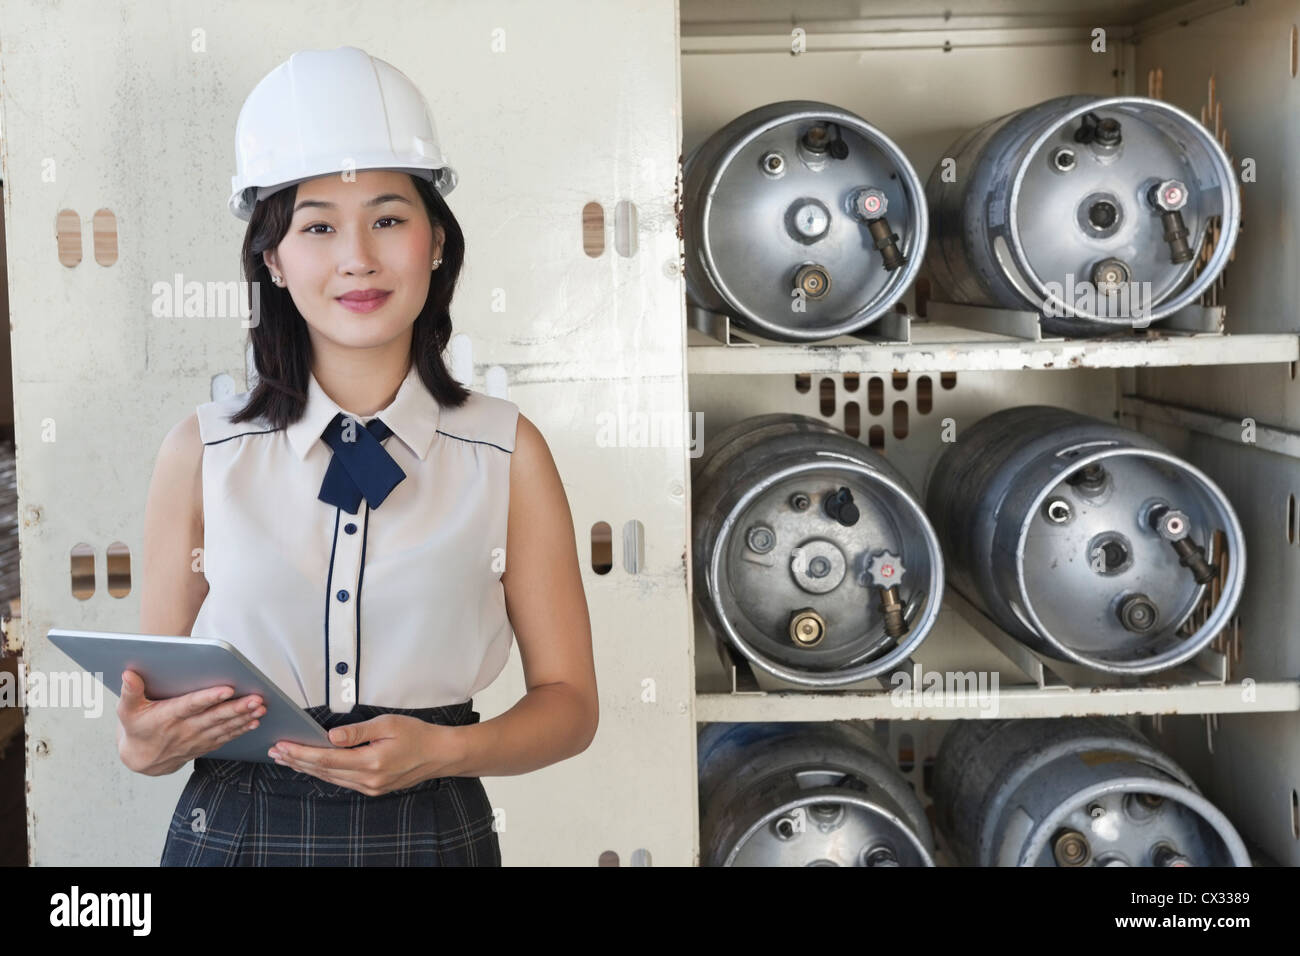 Portrait of female industrial worker holding tablet PC with cylinders on shelf in background Stock Photo